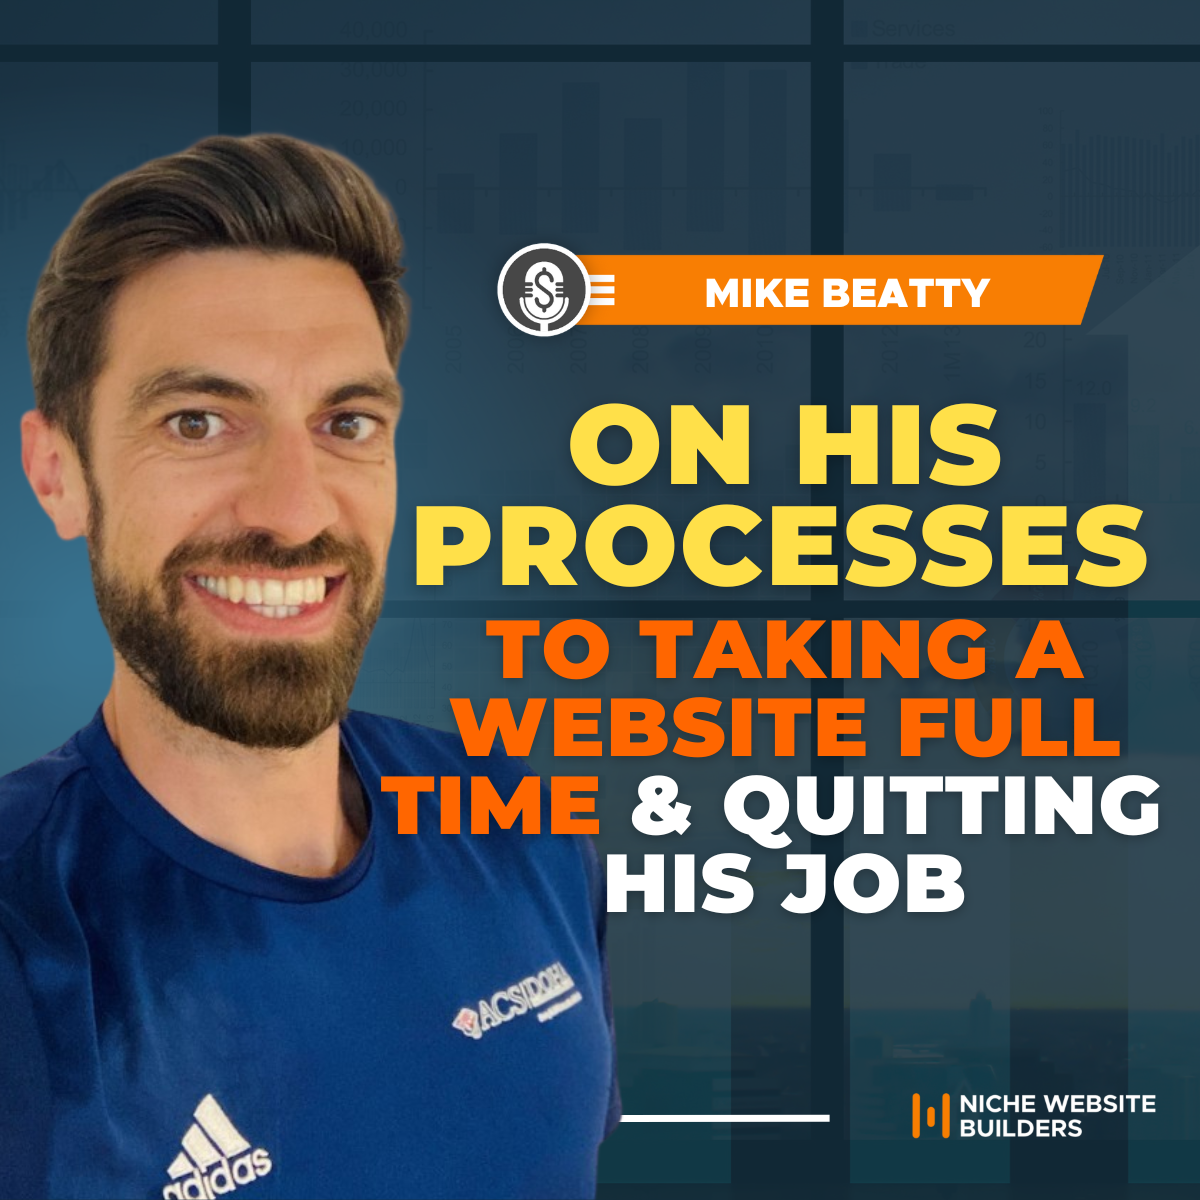 Mike Beatty on his Processes to Taking a Website Full Time and Quitting his Job